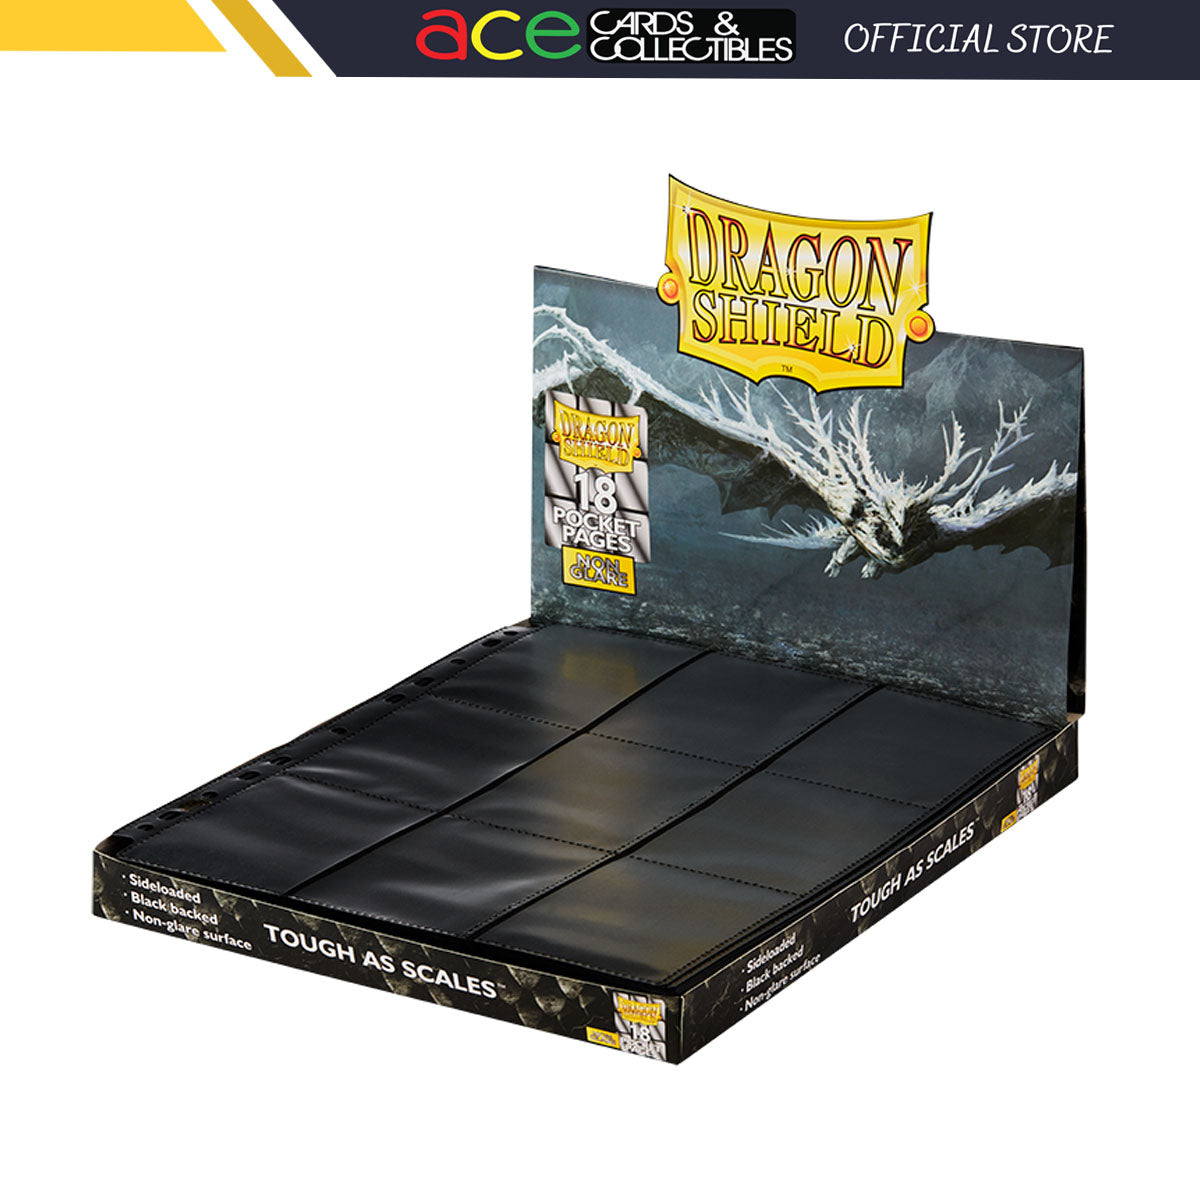 Dragon Shield Pocket Pages: Premium Pocket Pages for TCG Binders